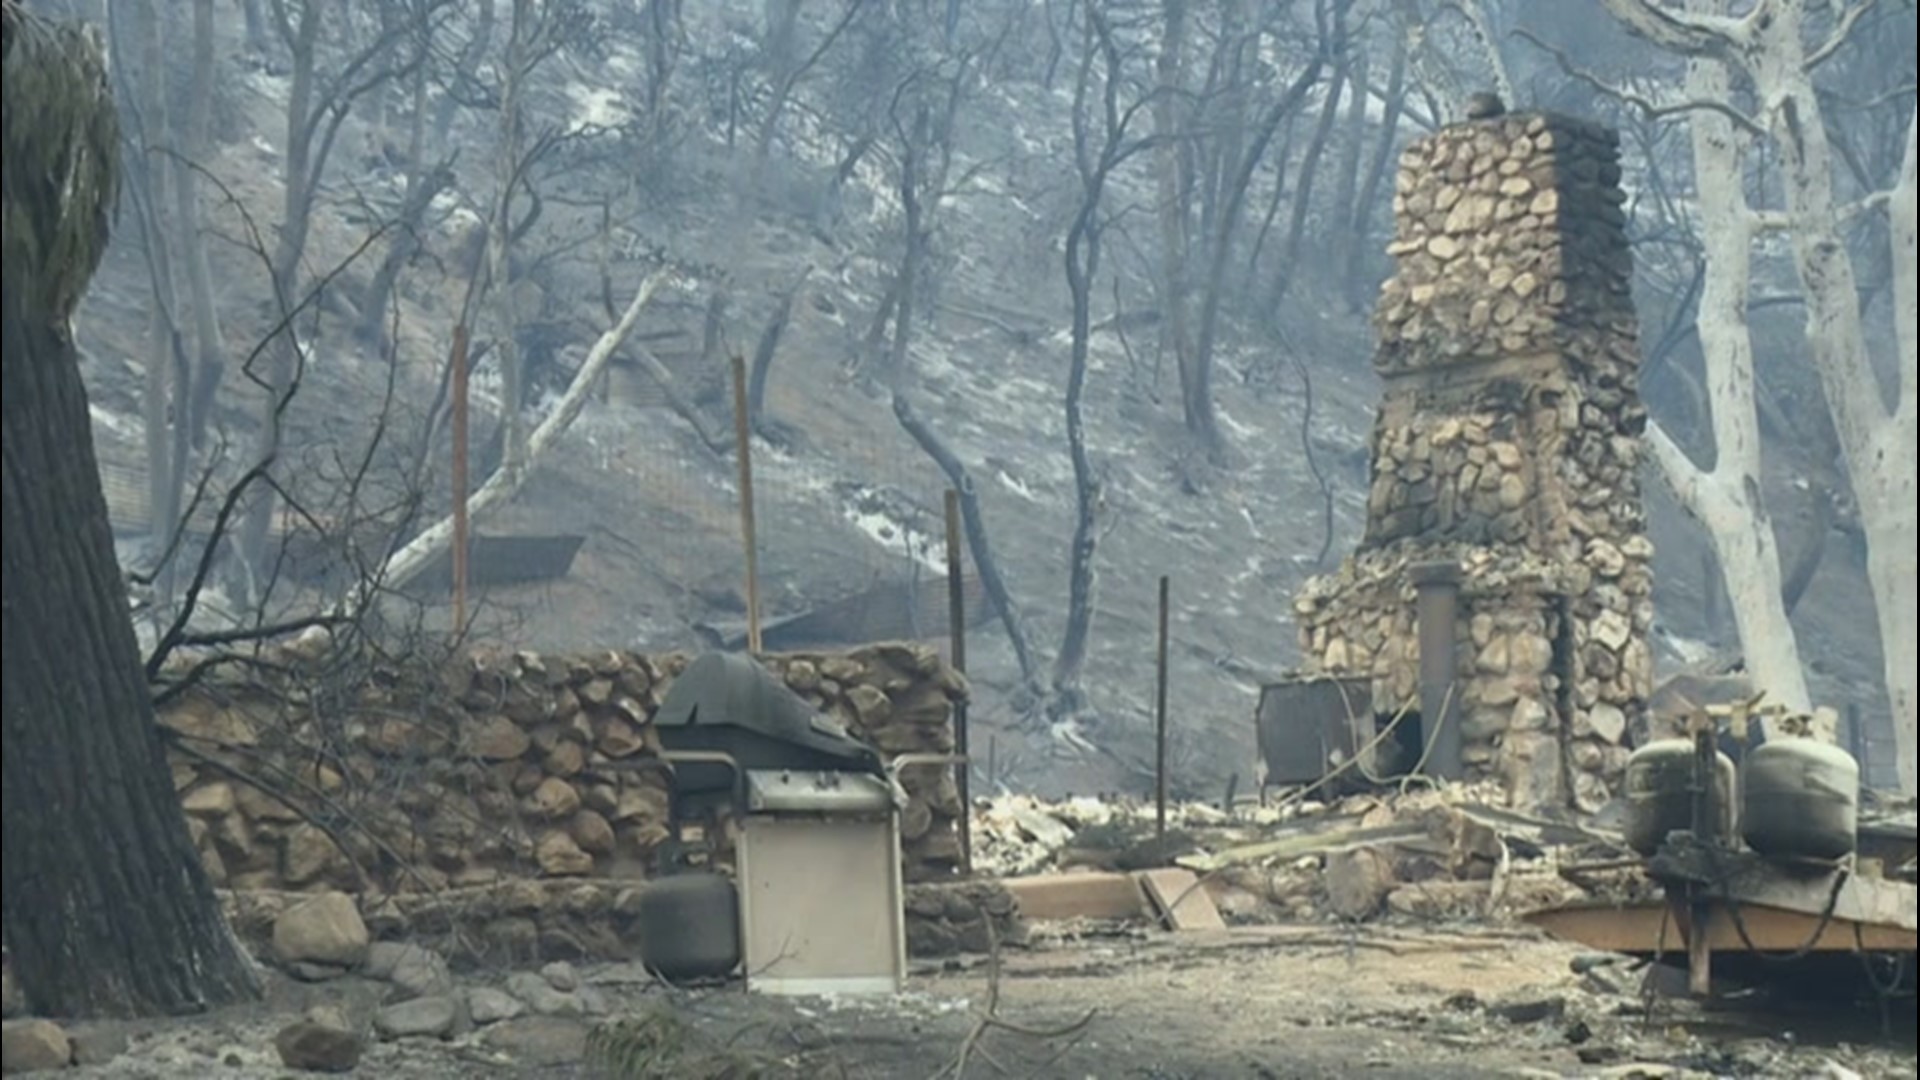 Numerous structures were destroyed as the Lake Fire, burning in California's Angeles National Forest, scorched through more than 10,000 acres.